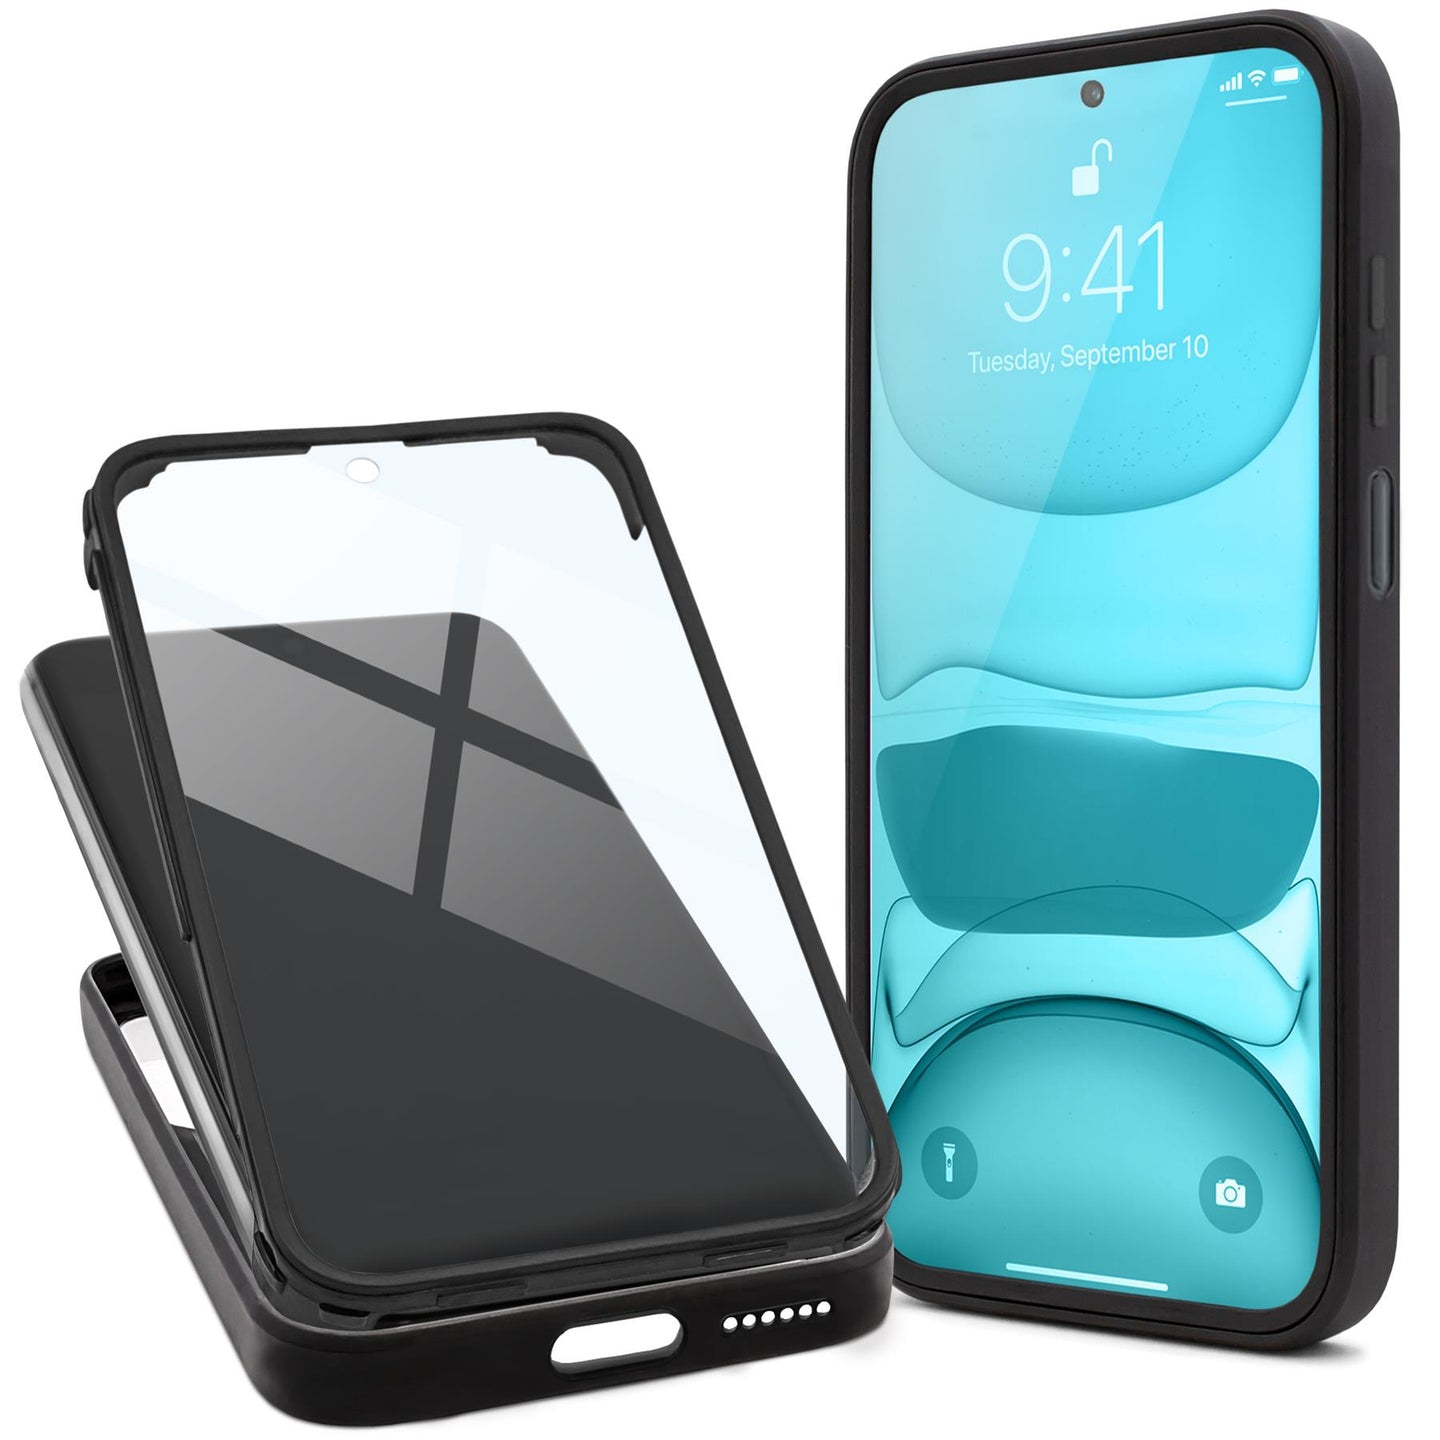 Moozy 360 Case for Xiaomi 11T and 11T Pro - Black Rim Transparent Case, Full Body Double-sided Protection, Cover with Built-in Screen Protector